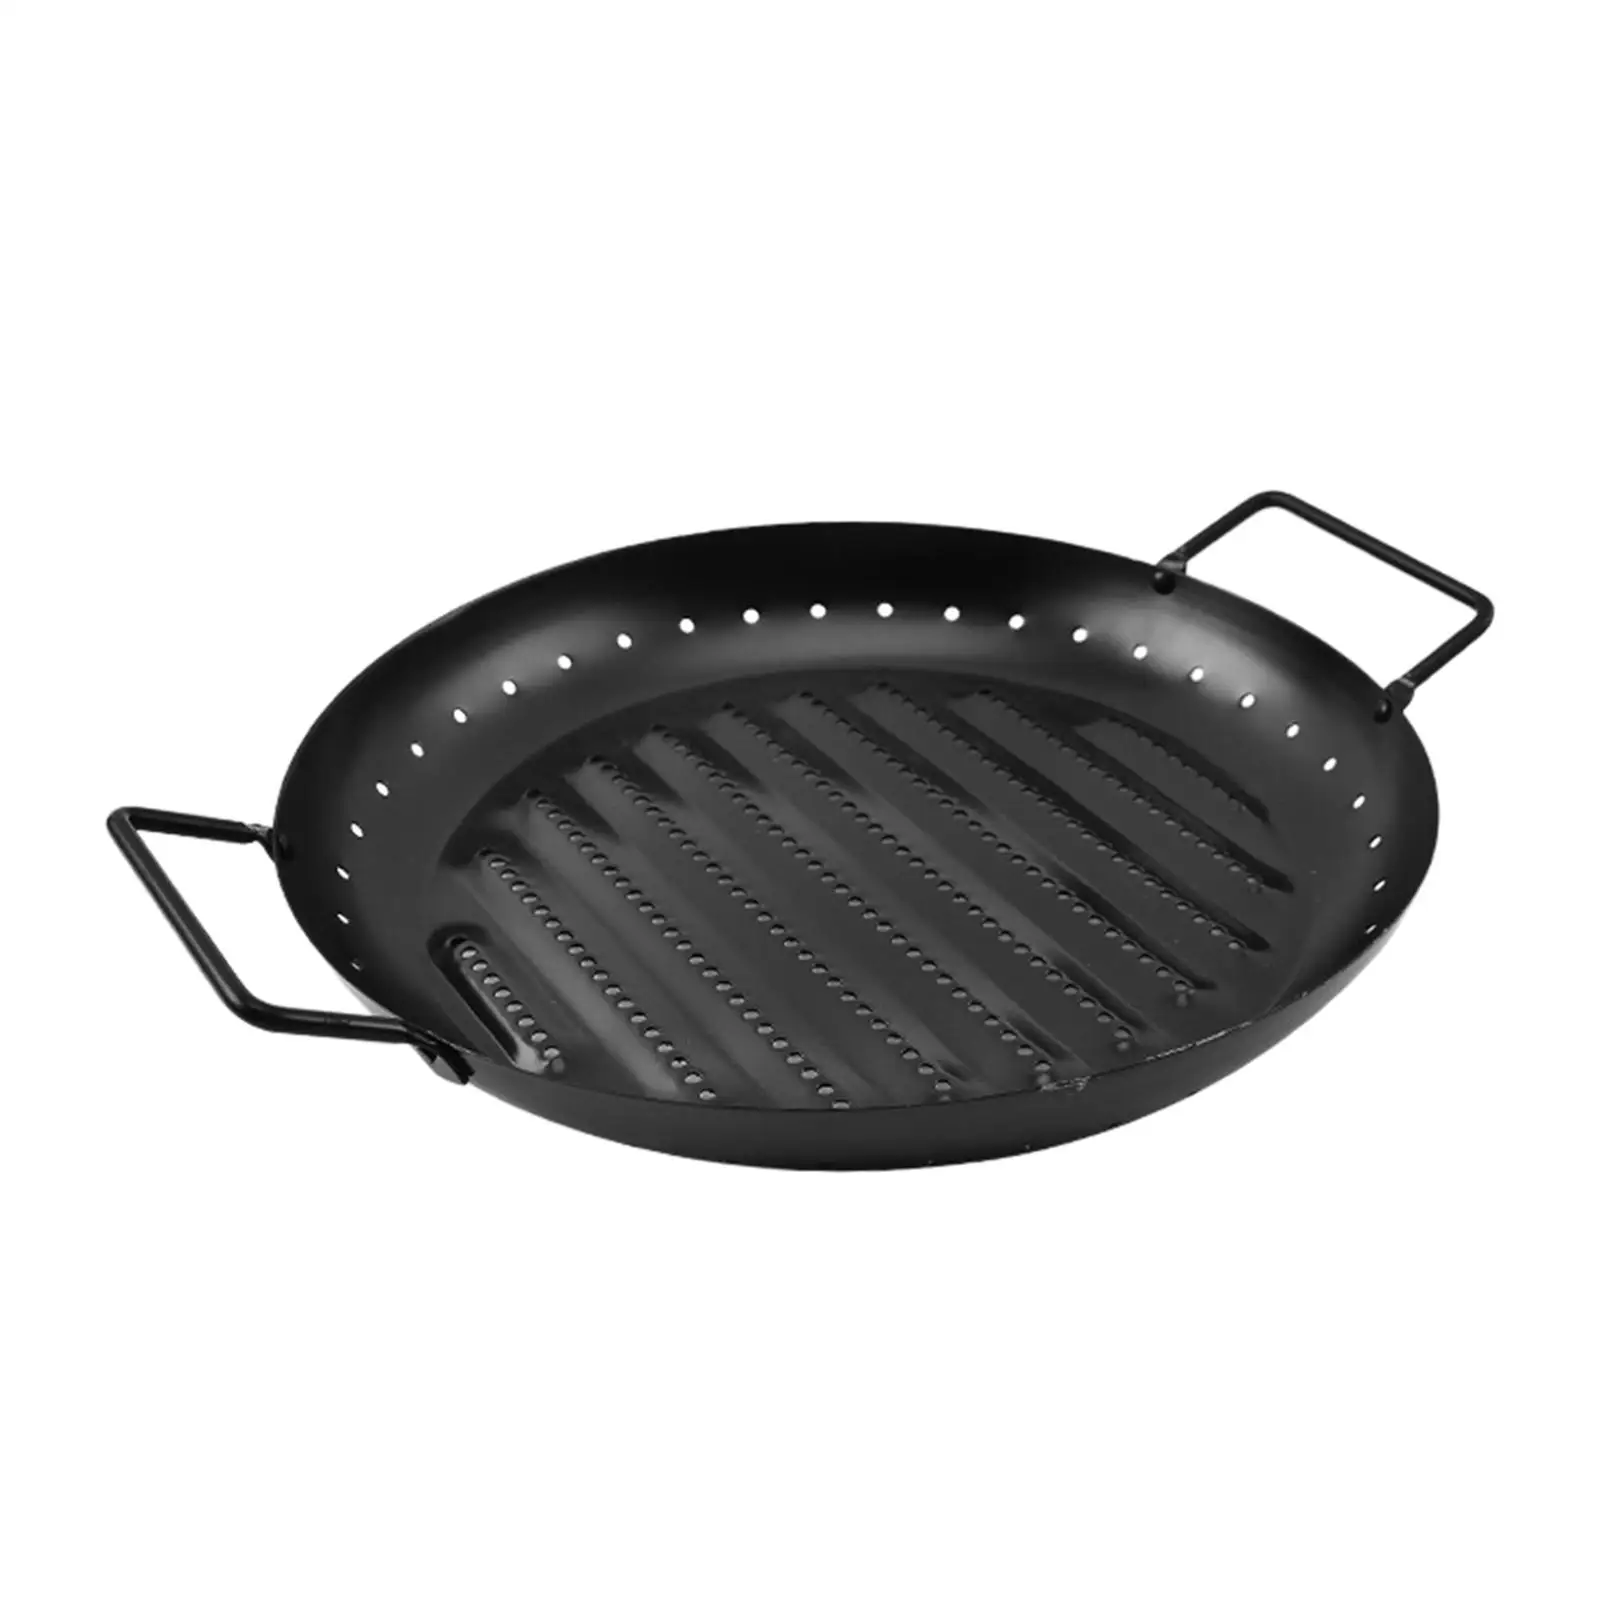 Grill Pans Nonstick BBQ Accessories Roasting Pan Durable Barbecue Grilling Baskets for Parties Baking Kitchen Camping Vegetable